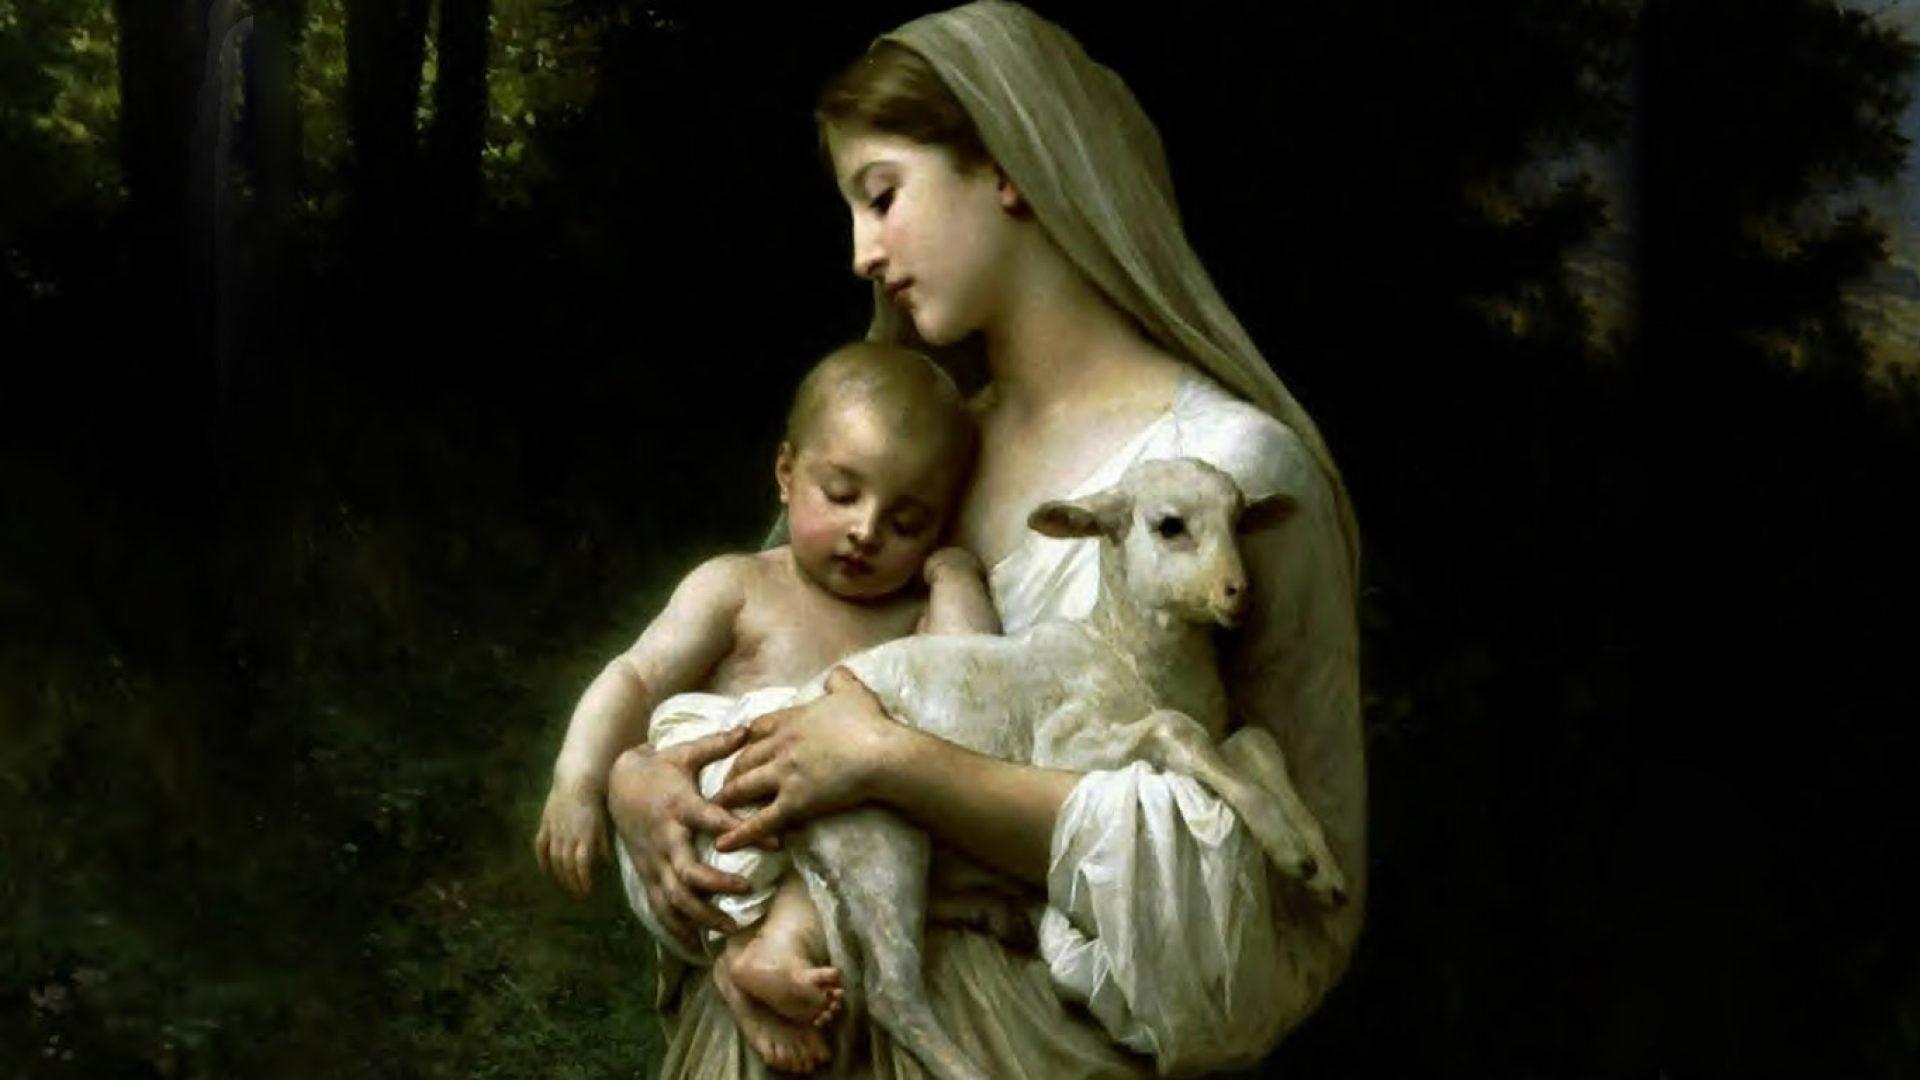 Mary And Jesus Wallpapers Top Free Mary And Jesus Backgrounds